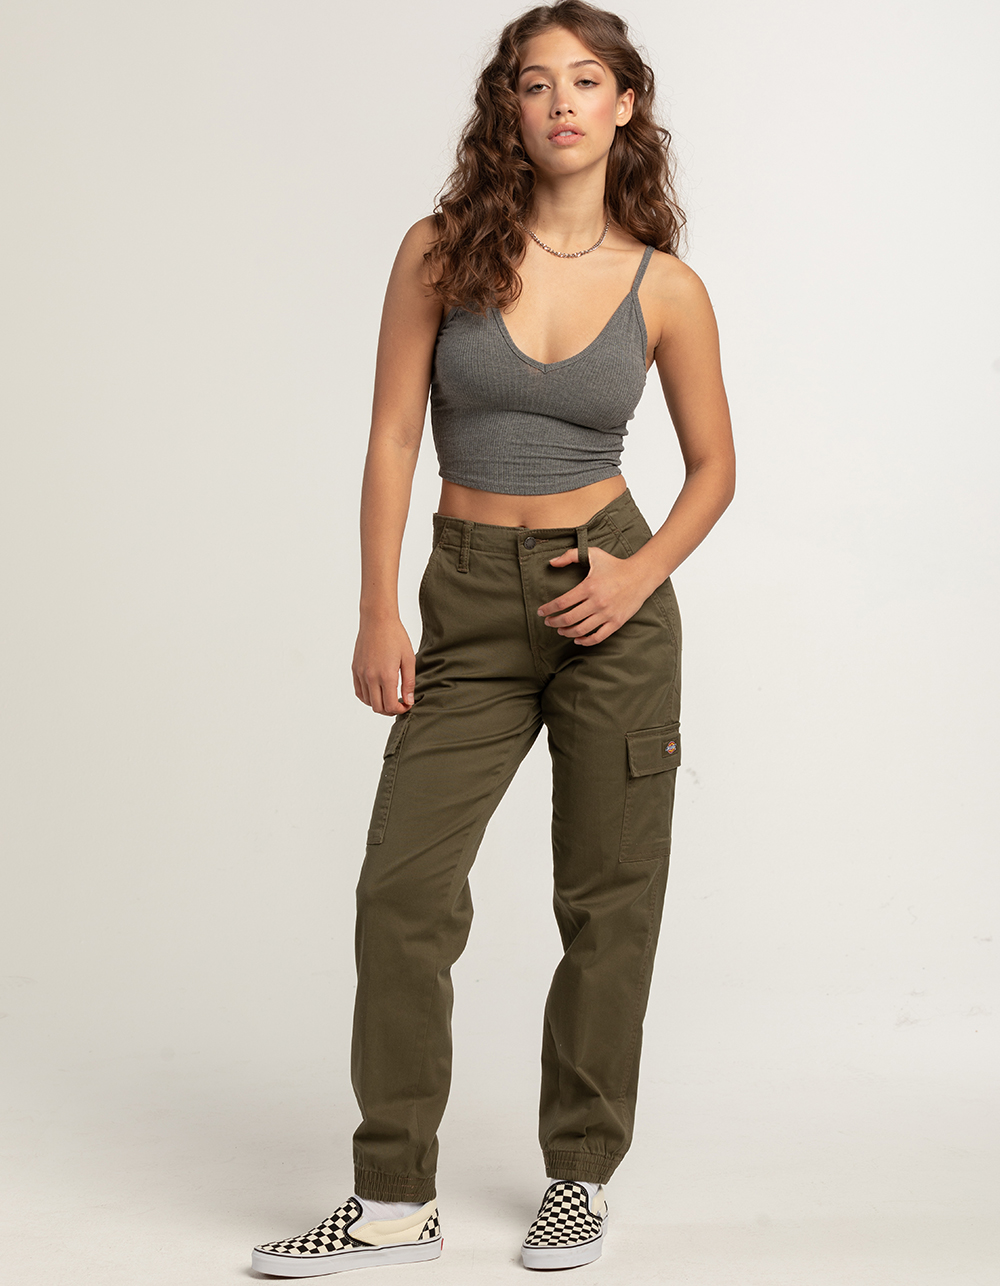 Military Pants For Women